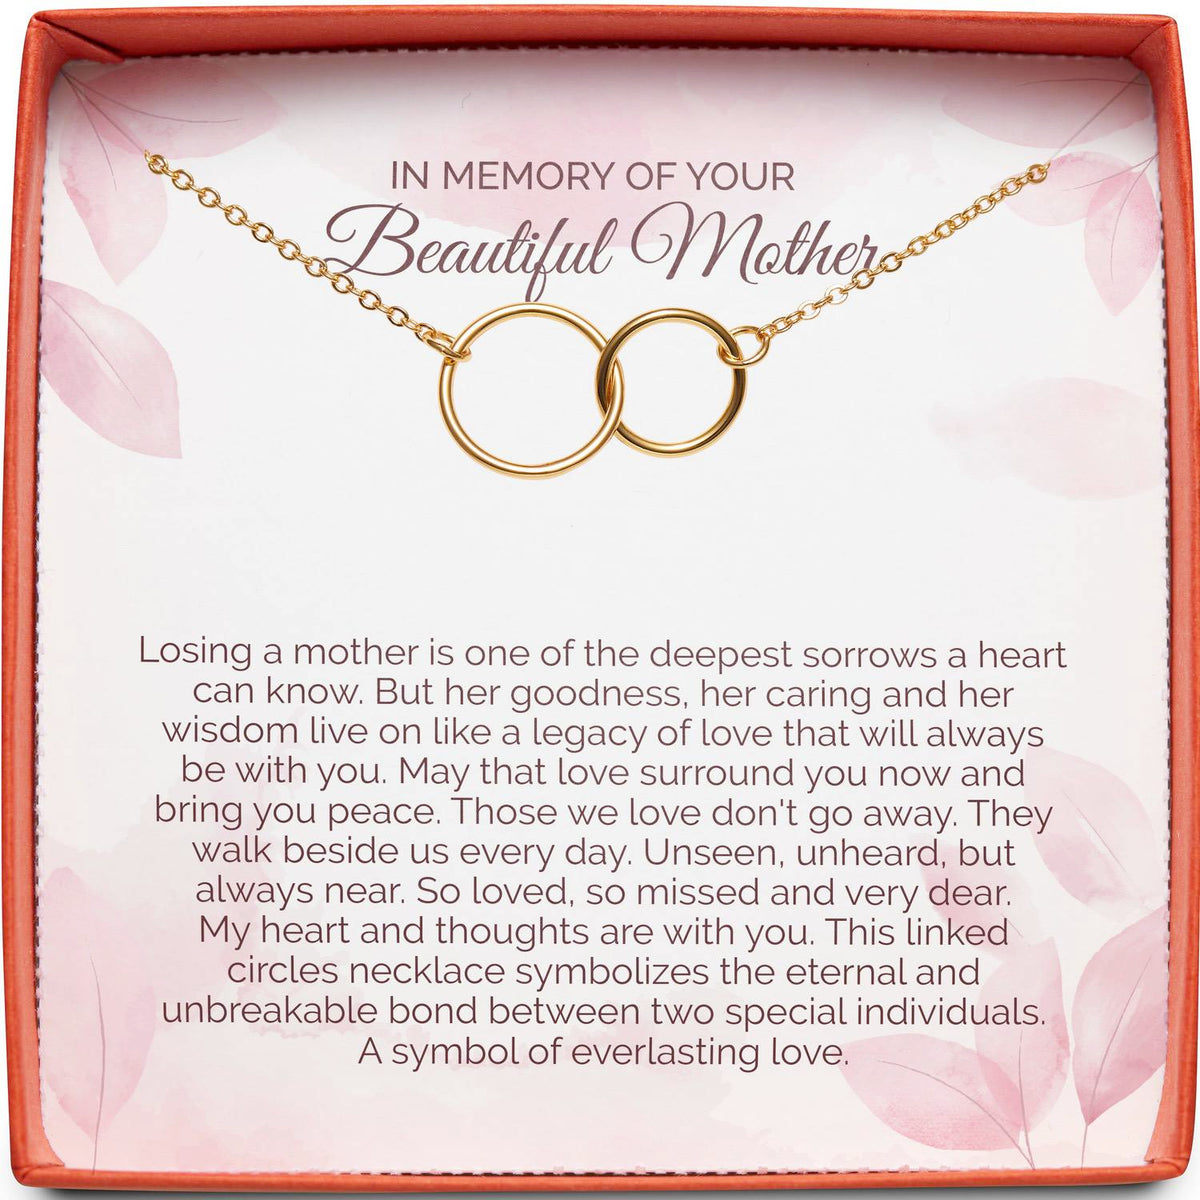 In Memory of your Beautiful Mother | Everlasting Love | Interlocking Circles